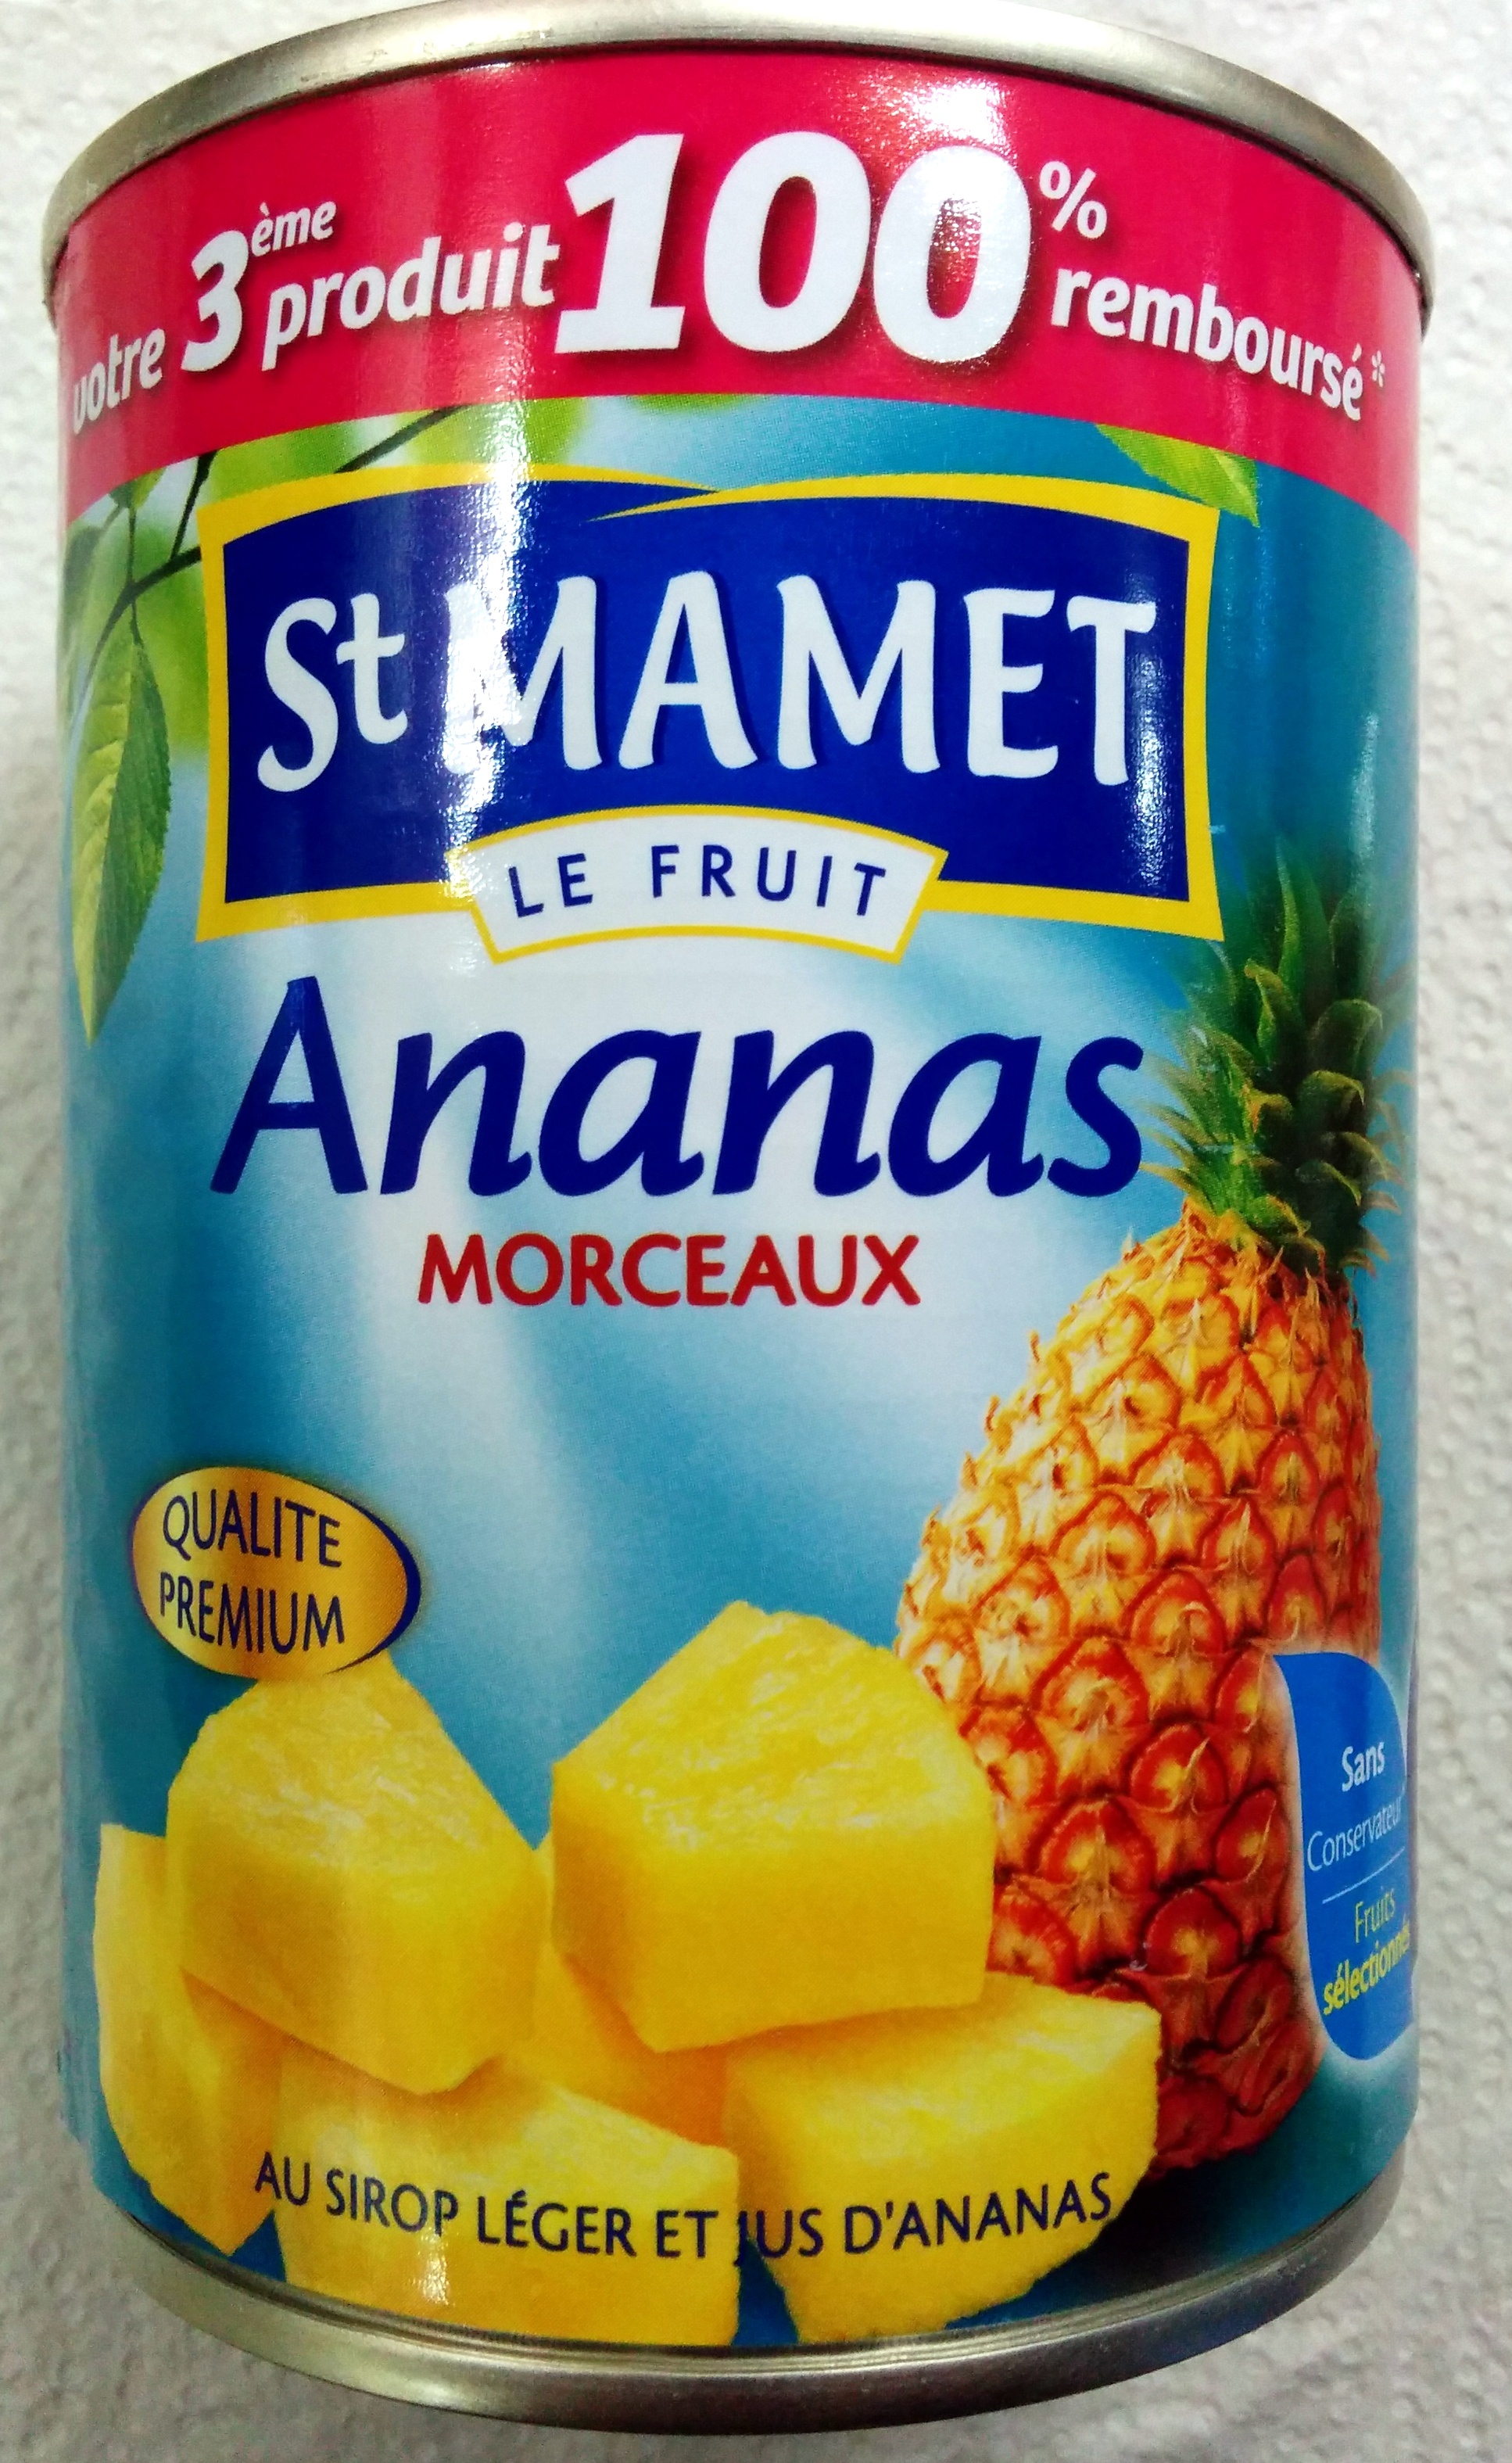 Ananas morceaux - Product - fr